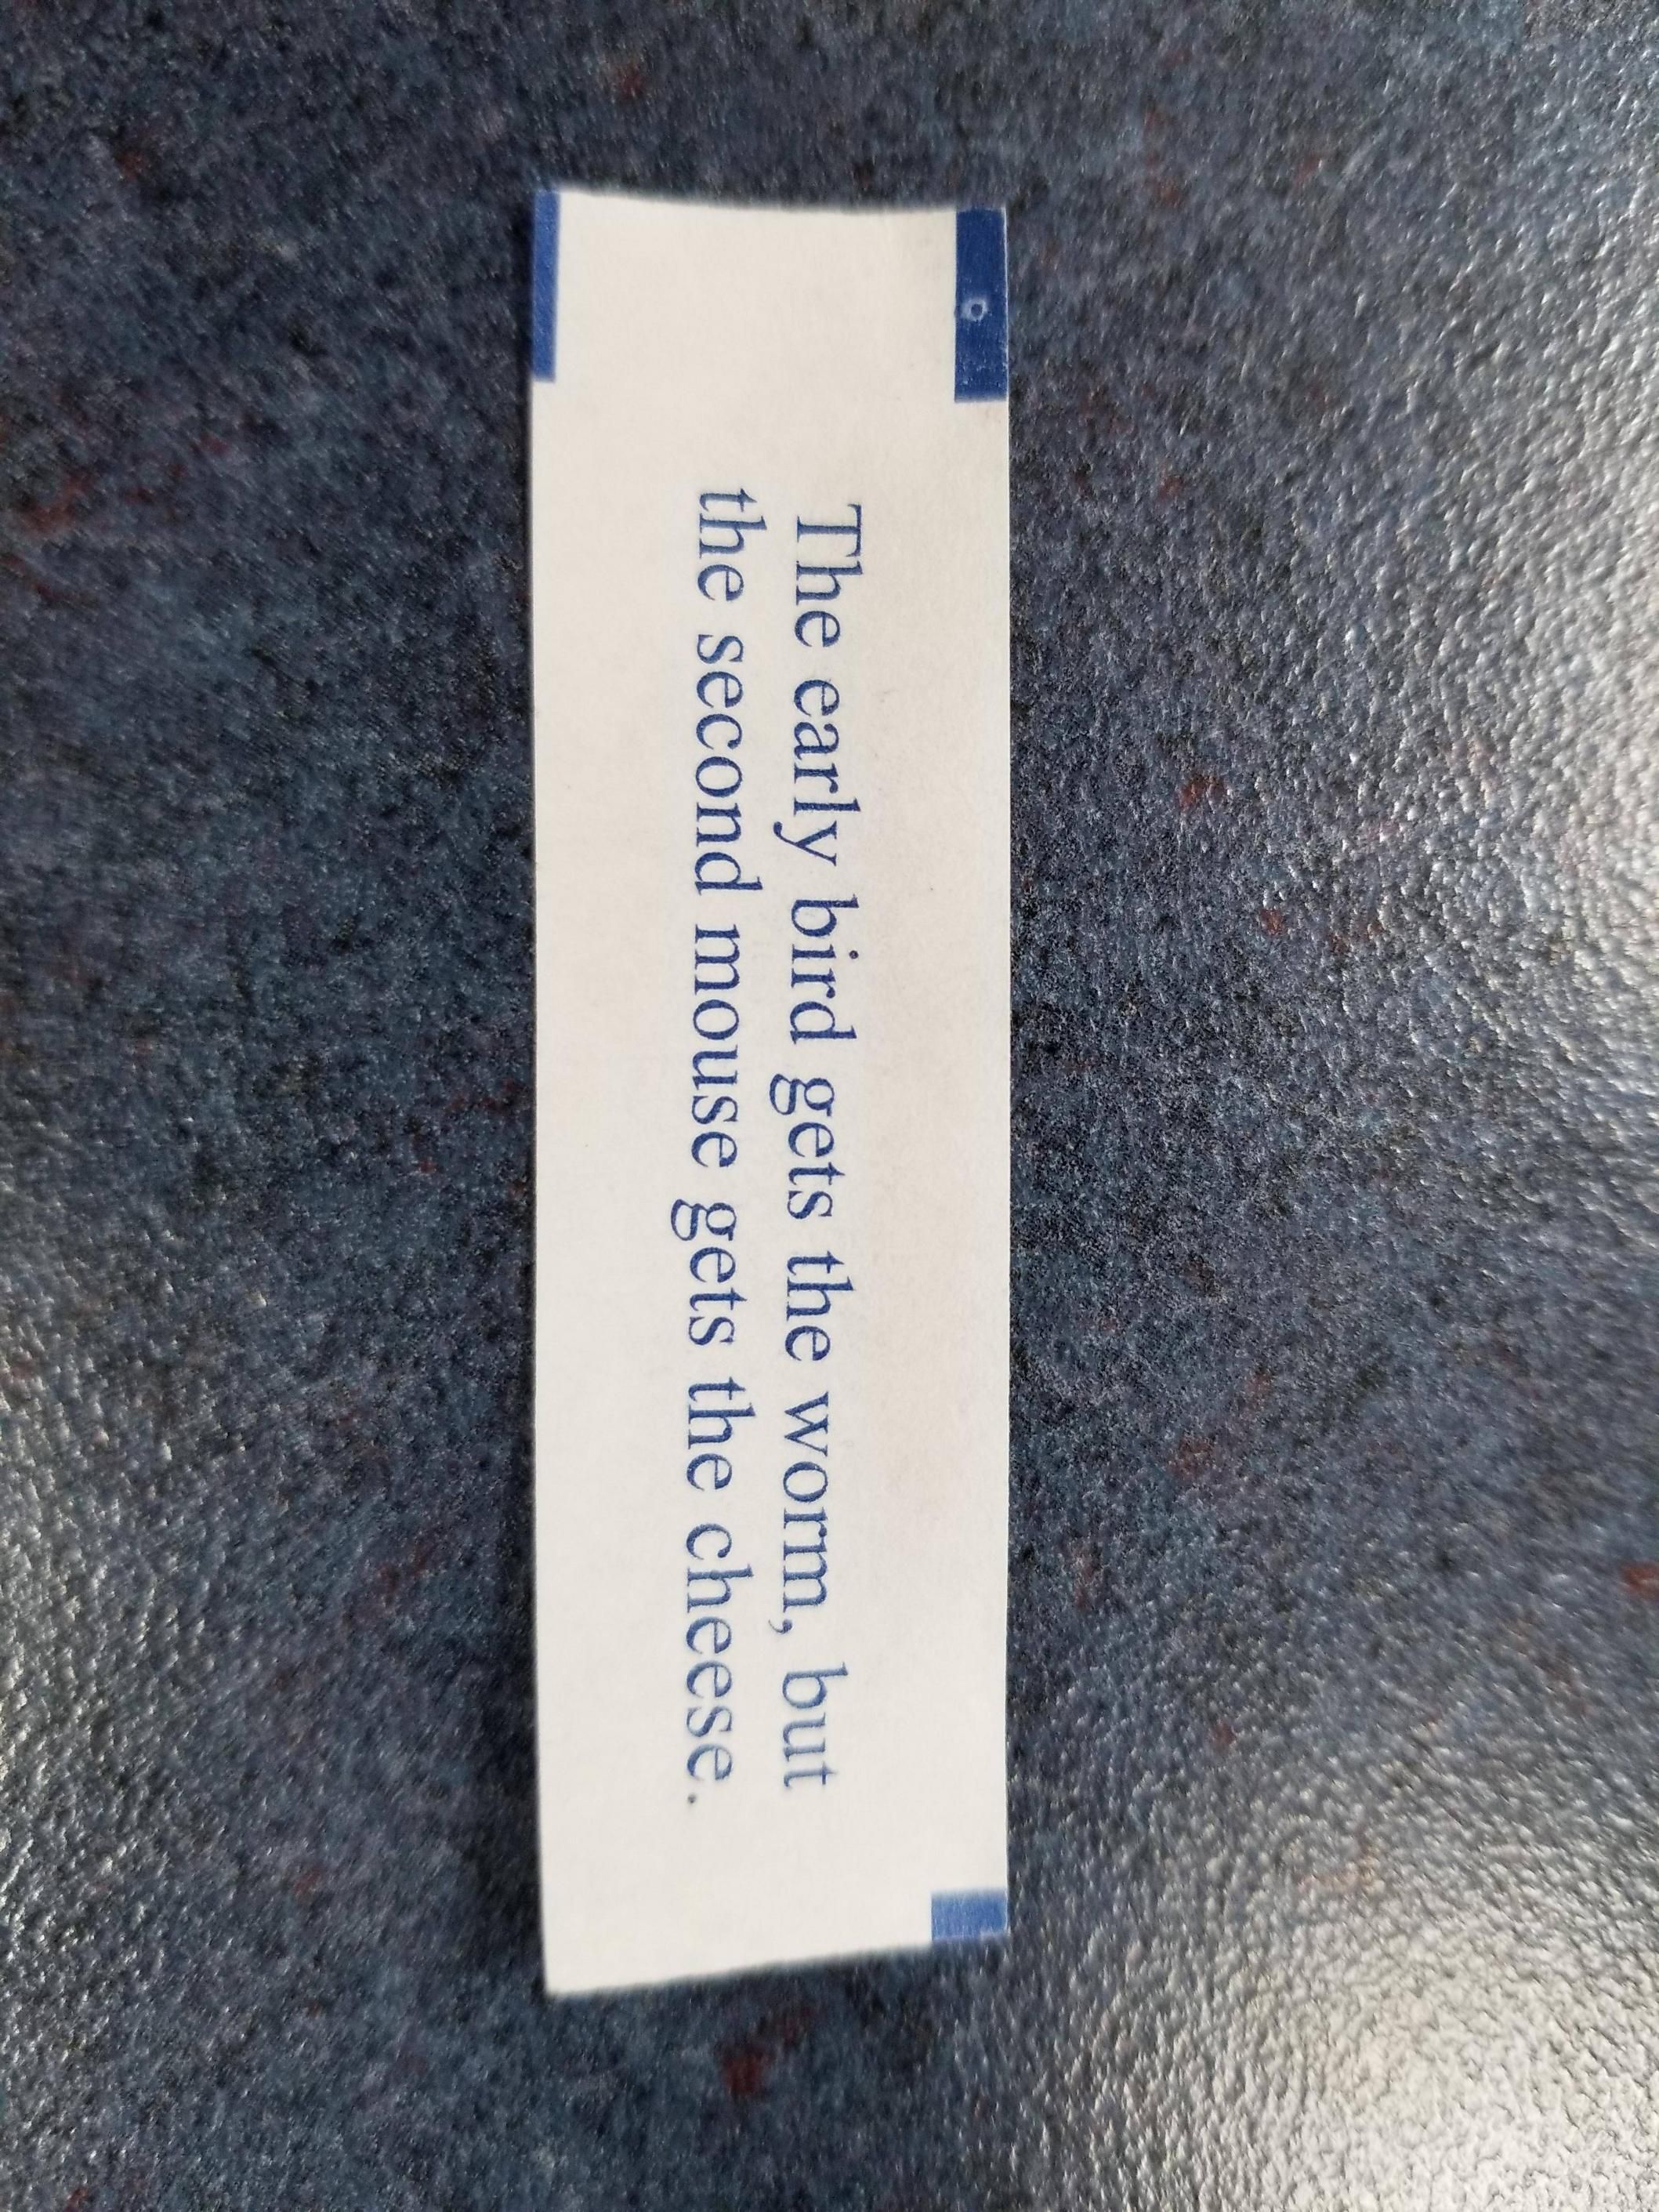 Best fortune I've ever seen.